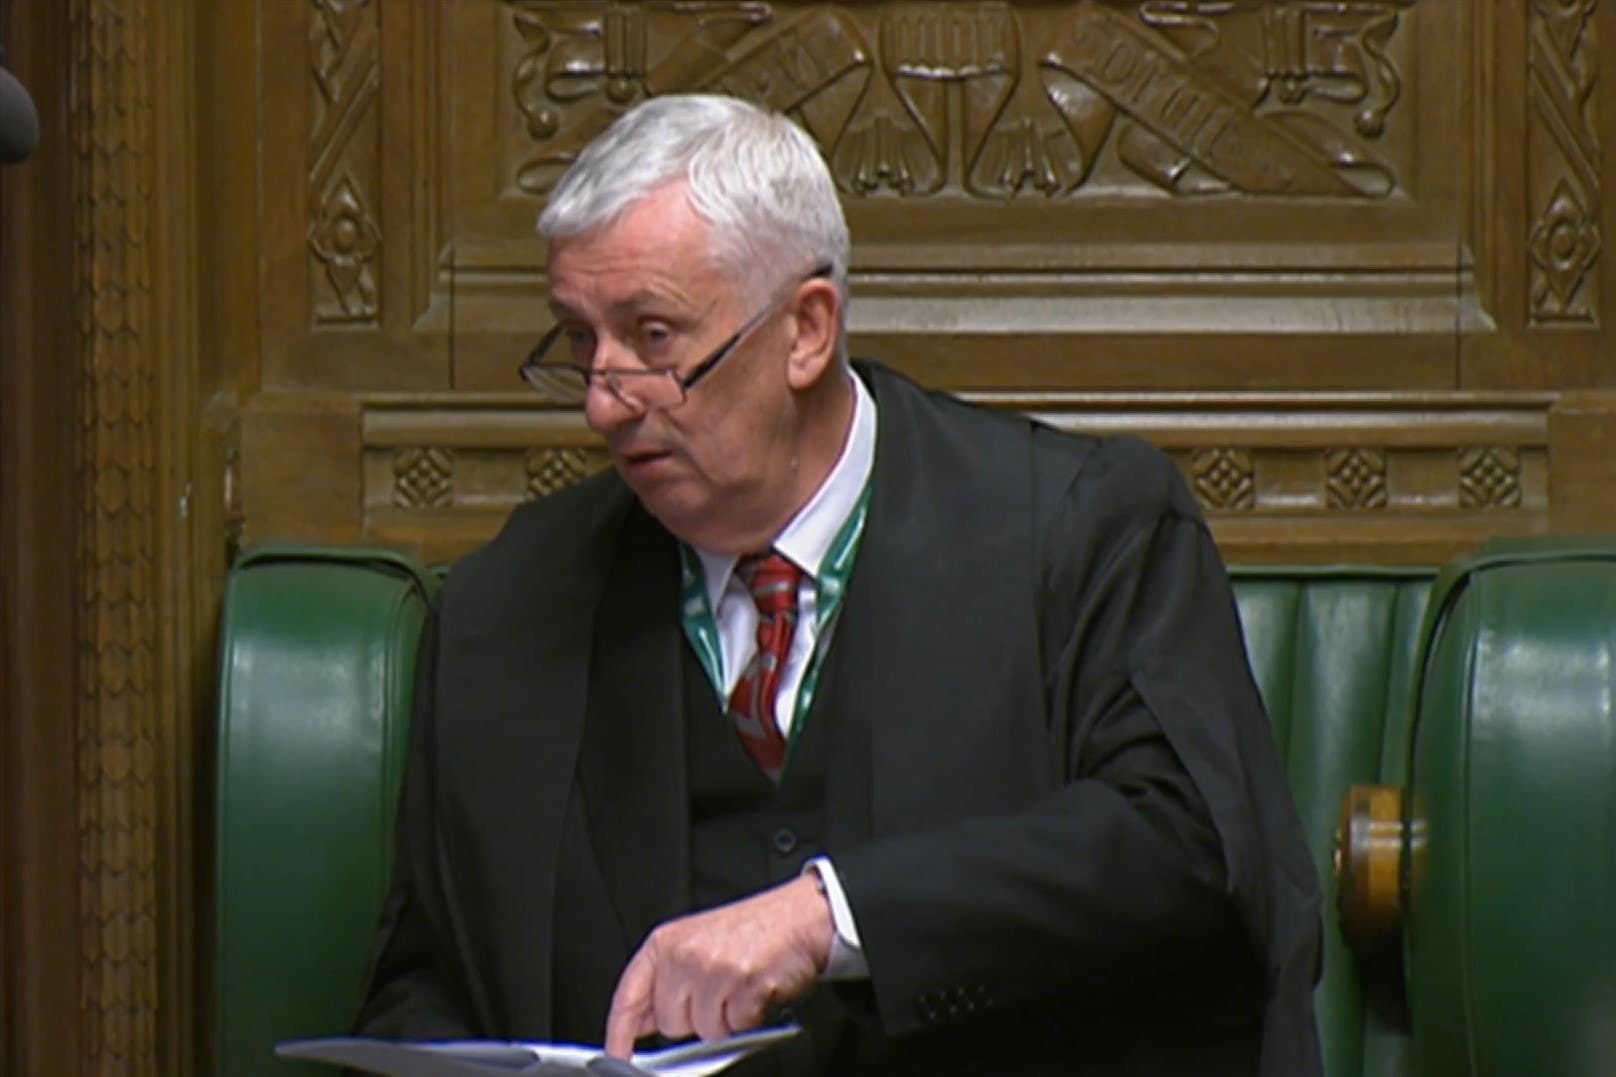 Speaker of the House of Commons Sir Lindsay Hoyle announces he has selected amendments tabled by Labour